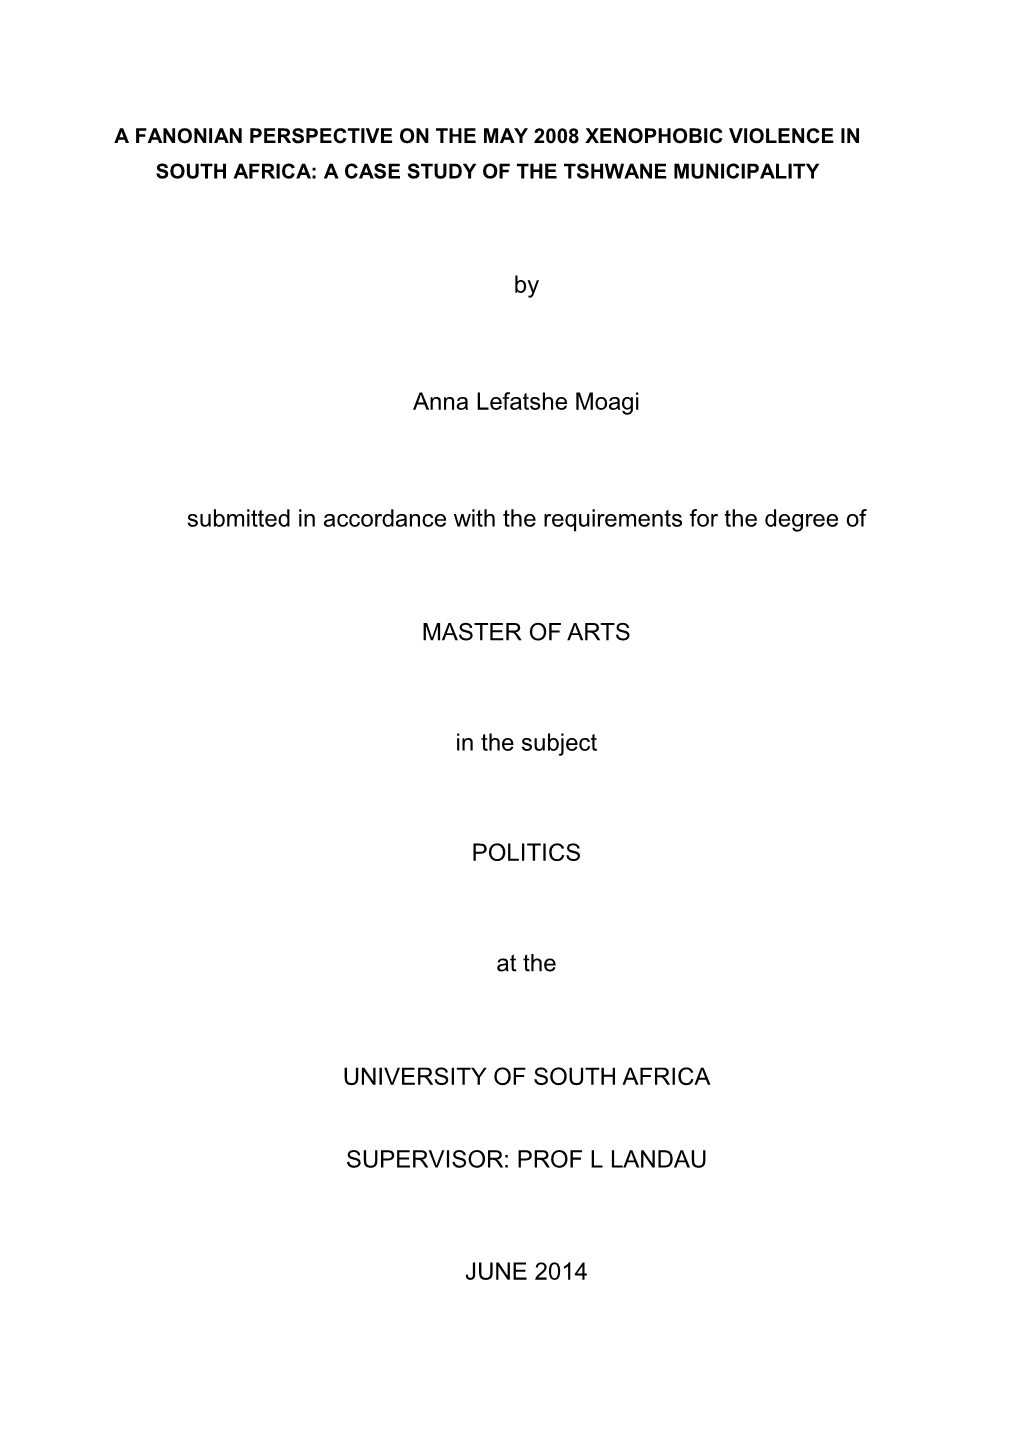 By Anna Lefatshe Moagi Submitted in Accordance with the Requirements for the Degree of MASTER of ARTS in the Subject POLITICS A